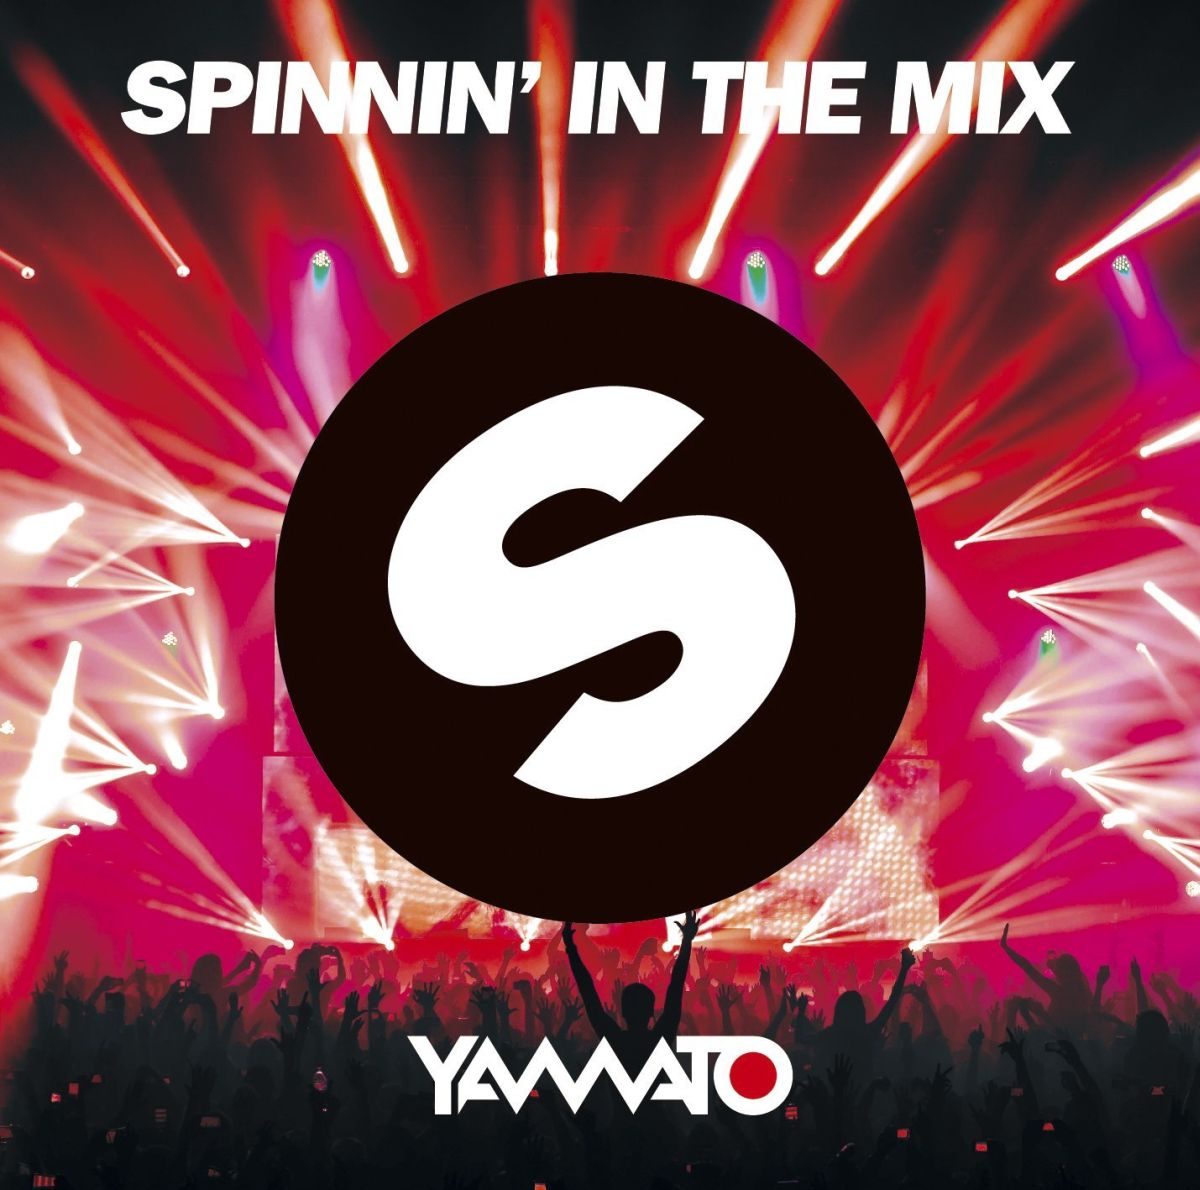 SPINNIN' IN THE MIX mixed by YAMATO